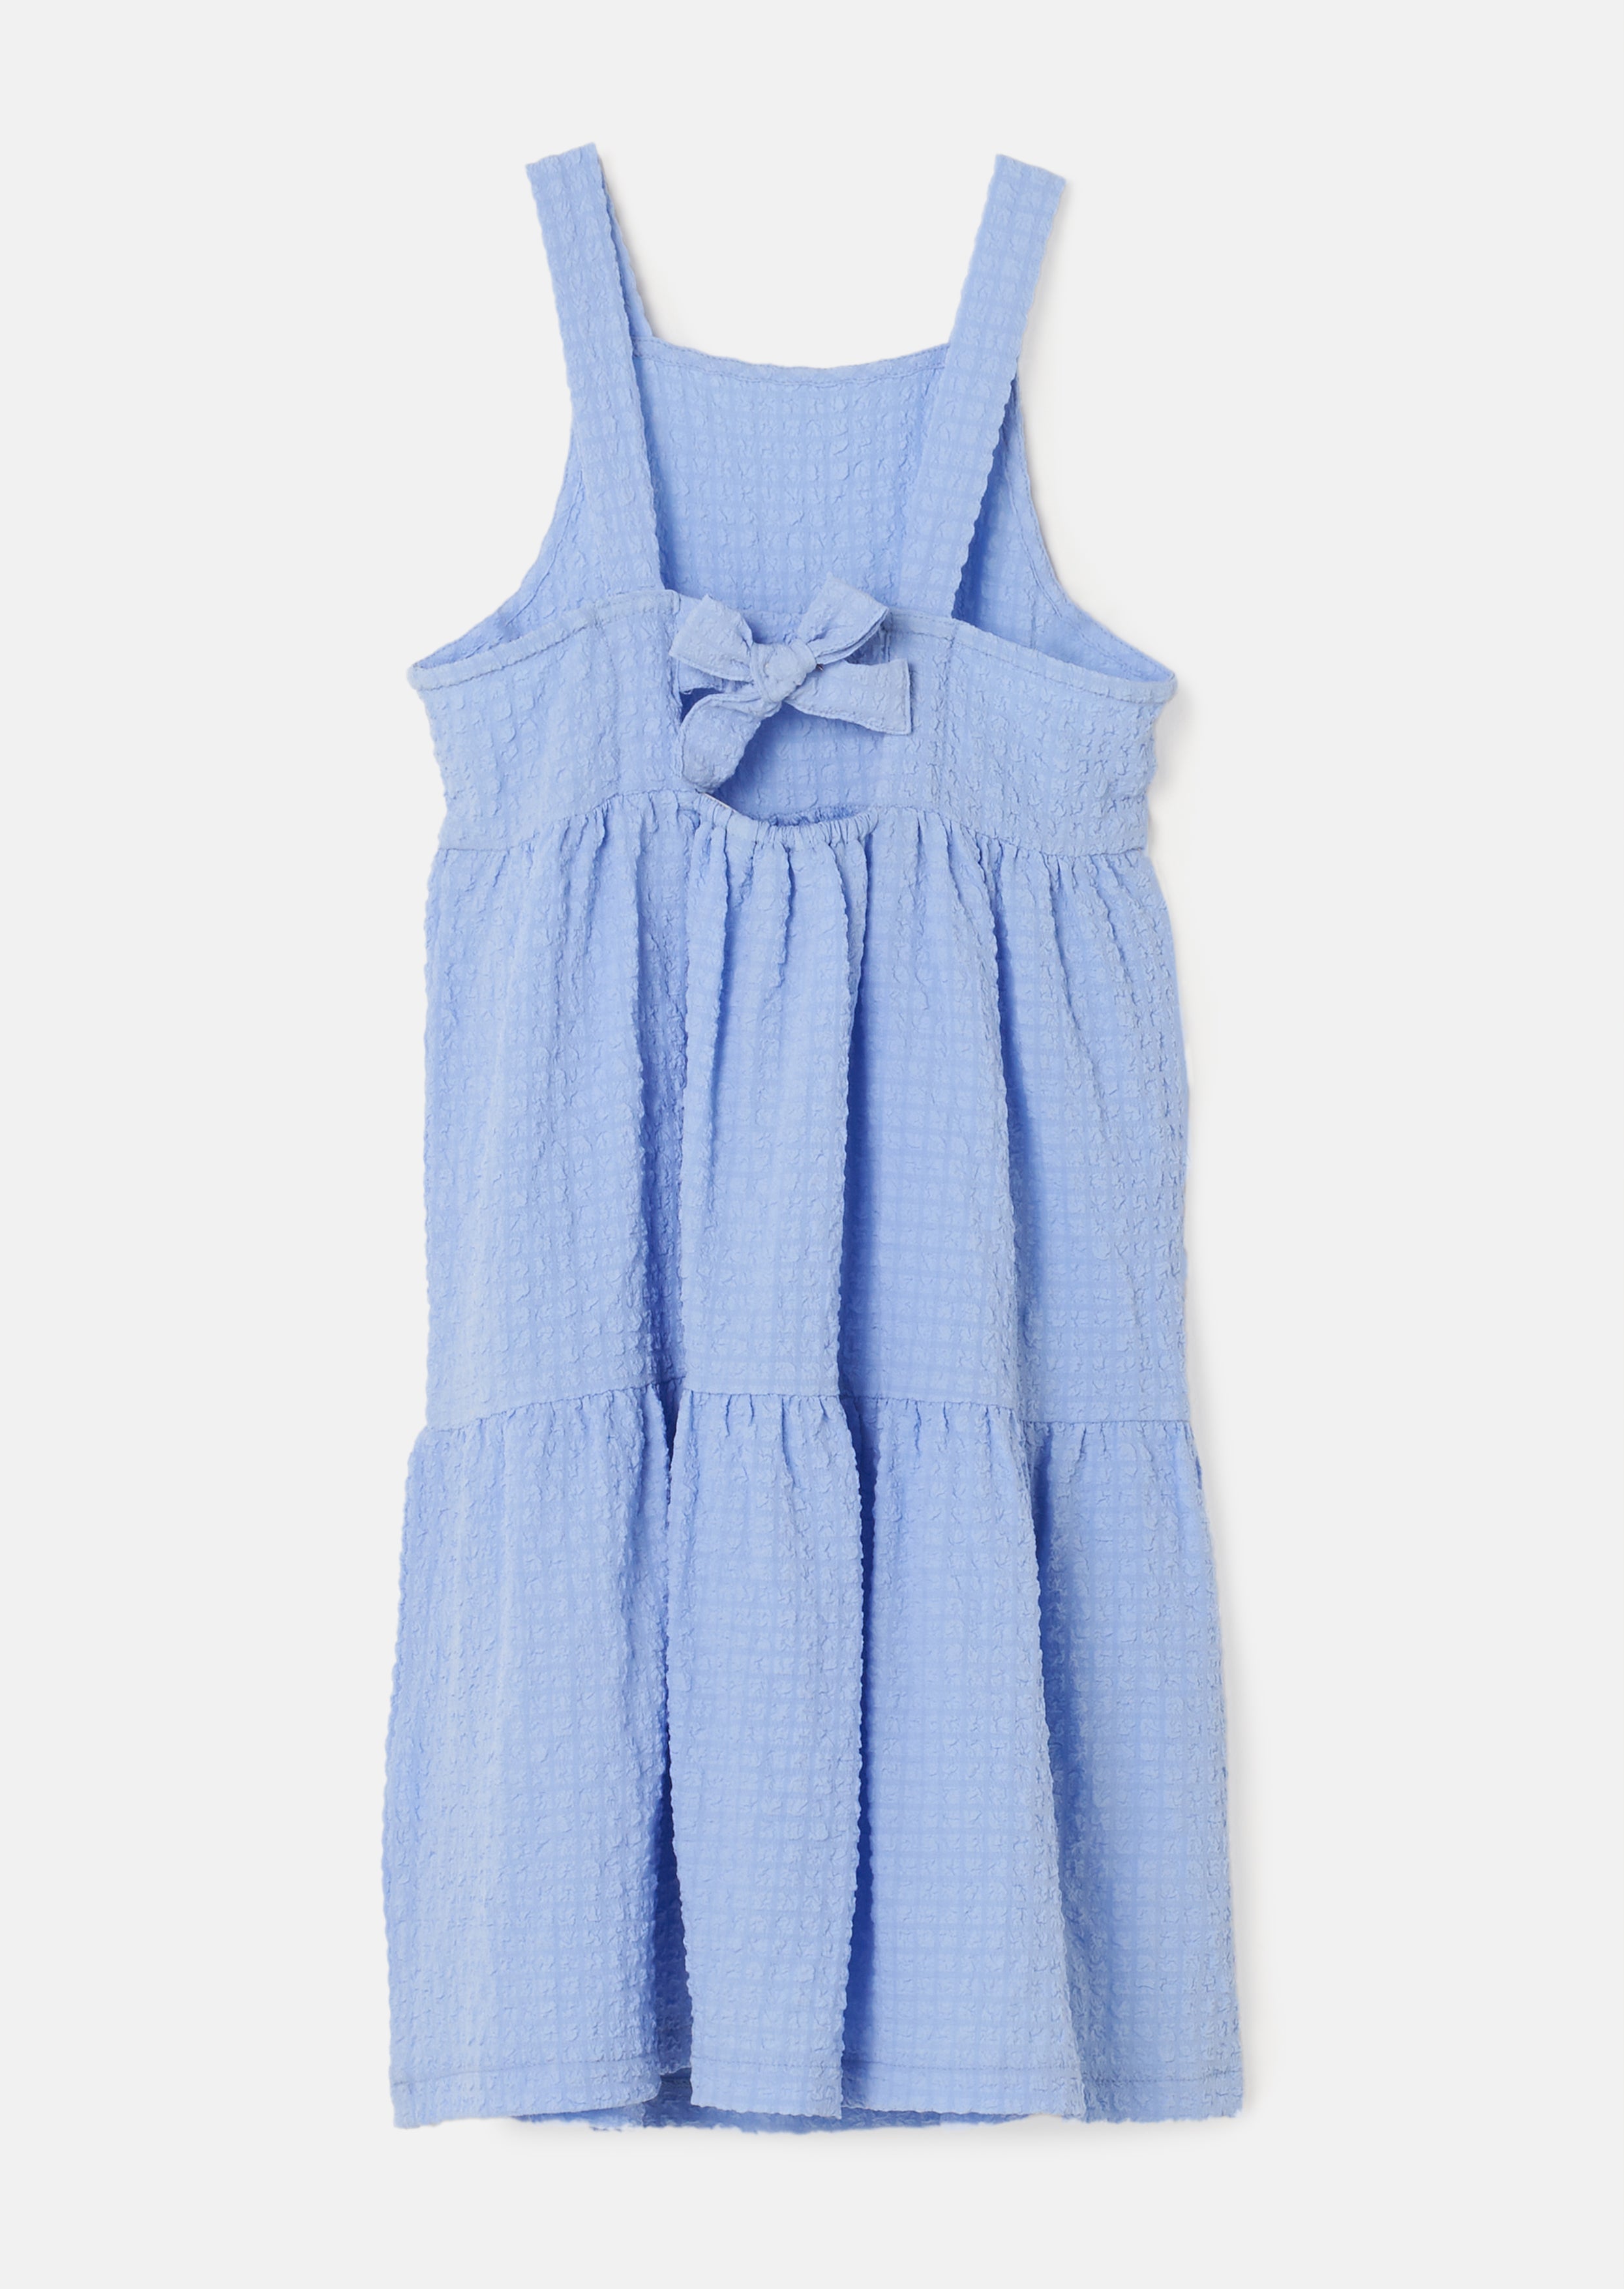 Baby Girl Solid Blue Woven Dress with Back Tie